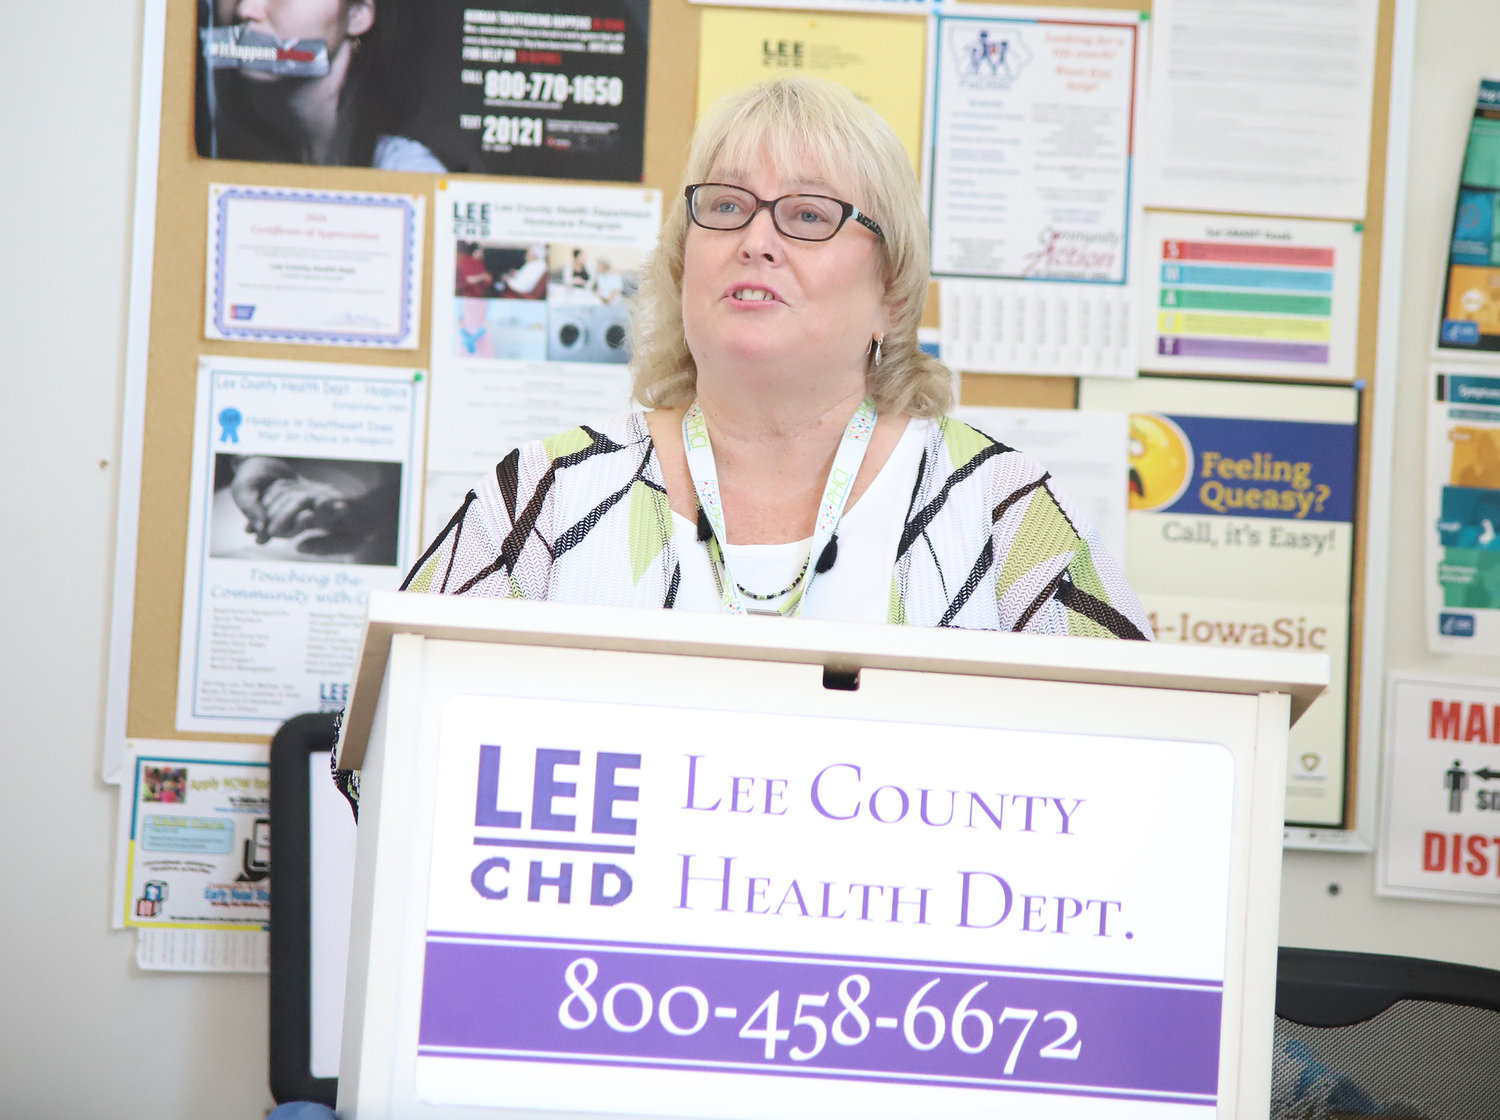 Lee County Health Department Administrator Michele Ross addresses a group Thursday regarding a grant the department received worth more than half a million dollars.